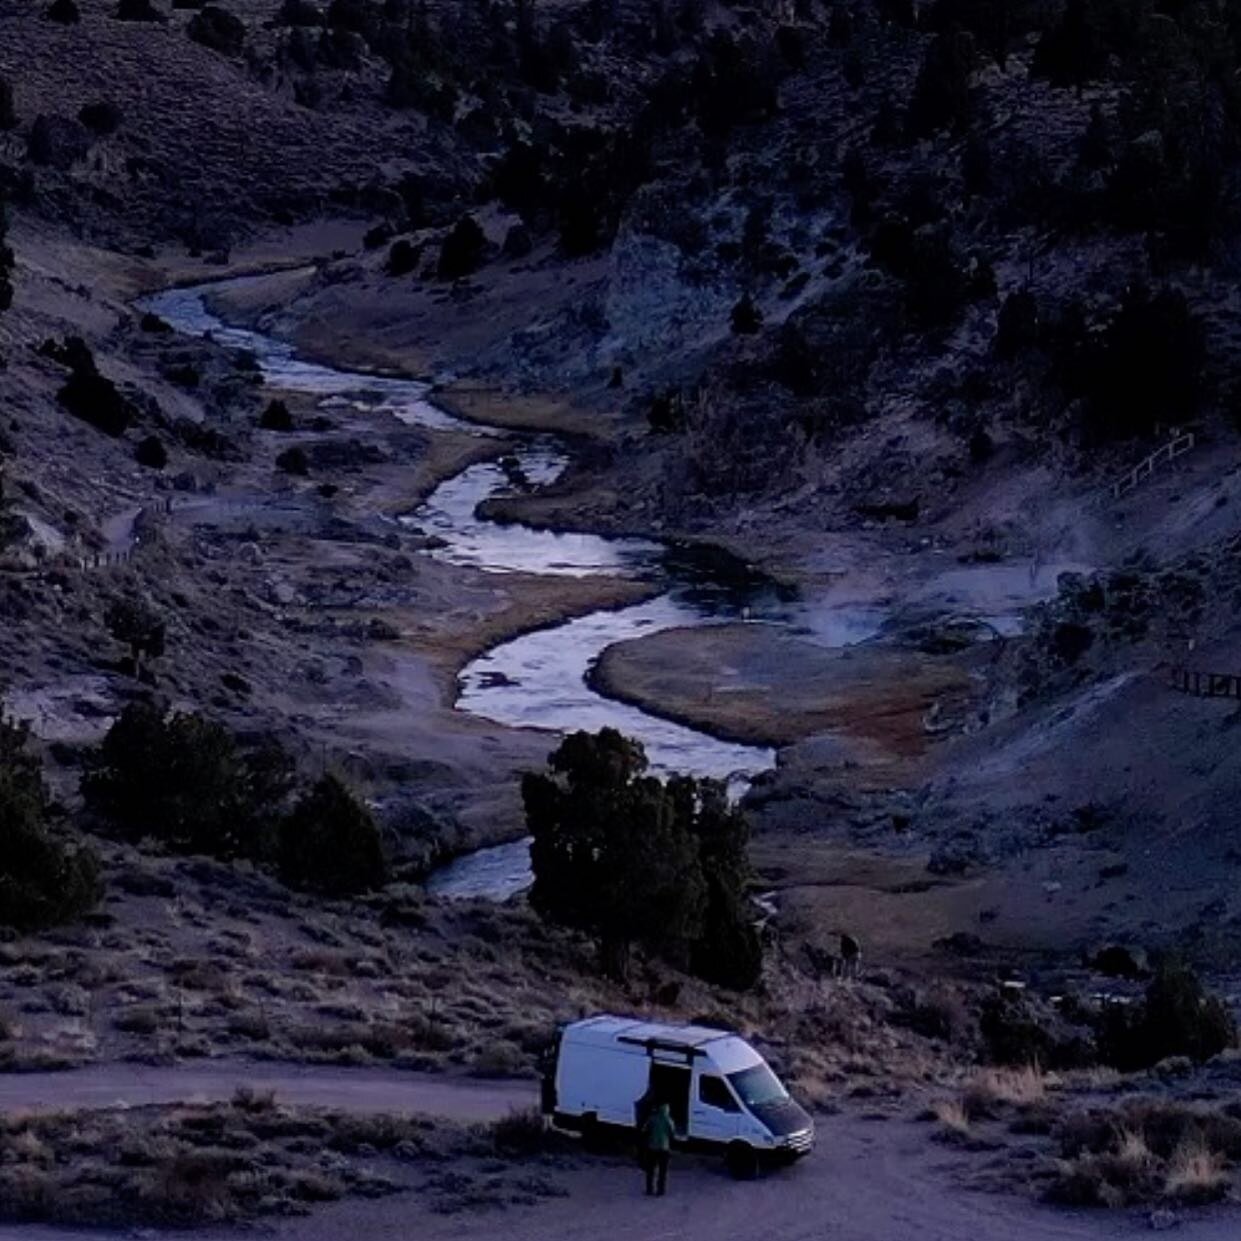 Man&hellip;We love getting out there with our conversions! 🚐 @simpleconversions #vanlife #van #sprintervan #nature #vanconversion #vanlifestyle #camping #vanlifediaries #lifestyle #outside #adventure #explore #roadtrip #mammoth #norcal #sierras #mou